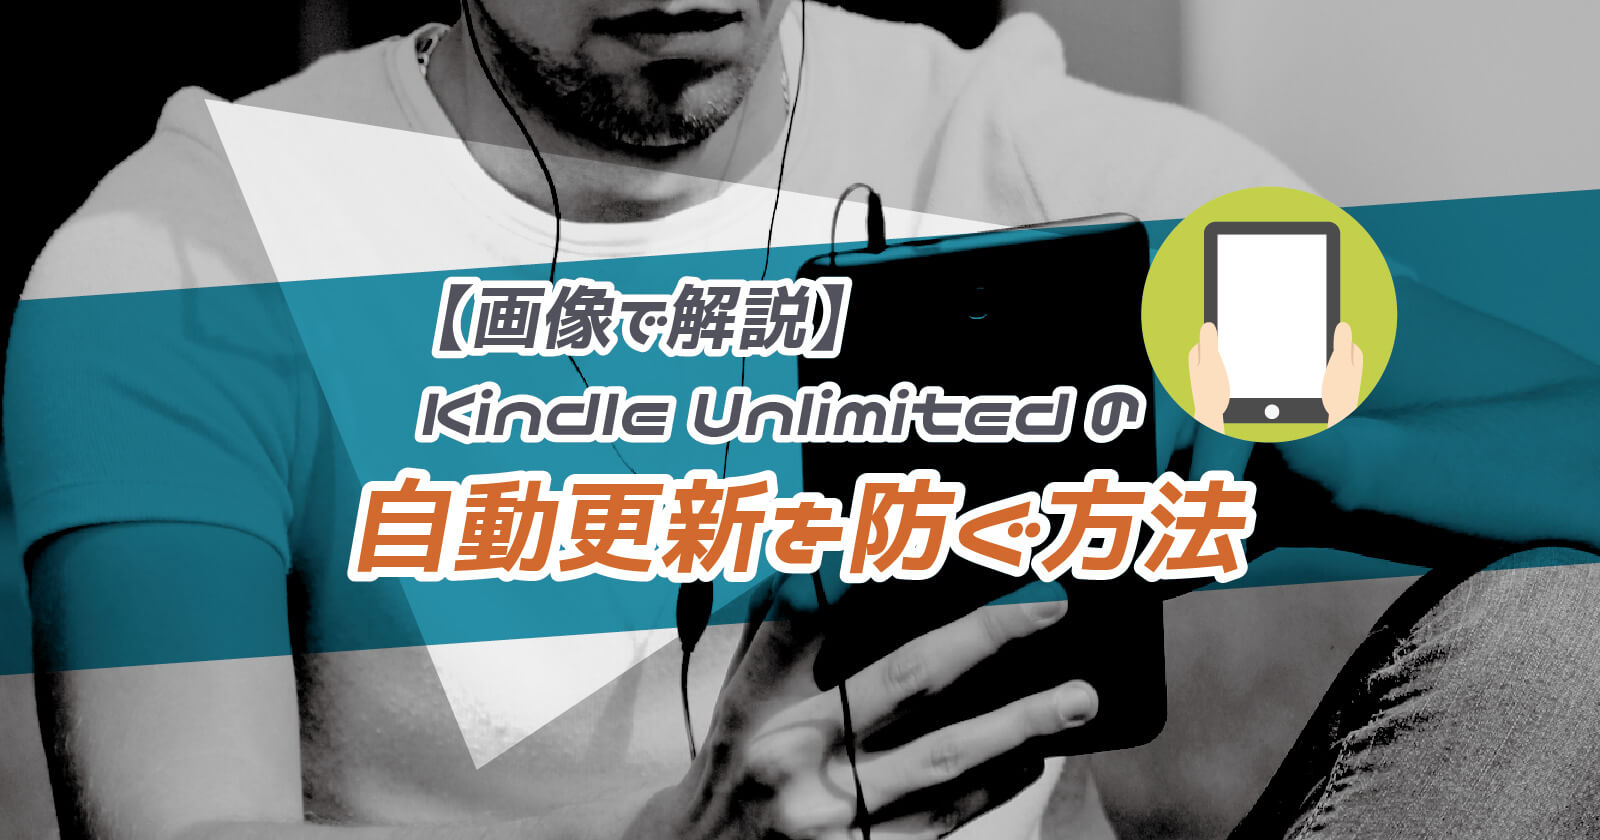 Kindle Unlimitedの自動更新を防ぐ方法を画像付きで解説 To Be Soldout